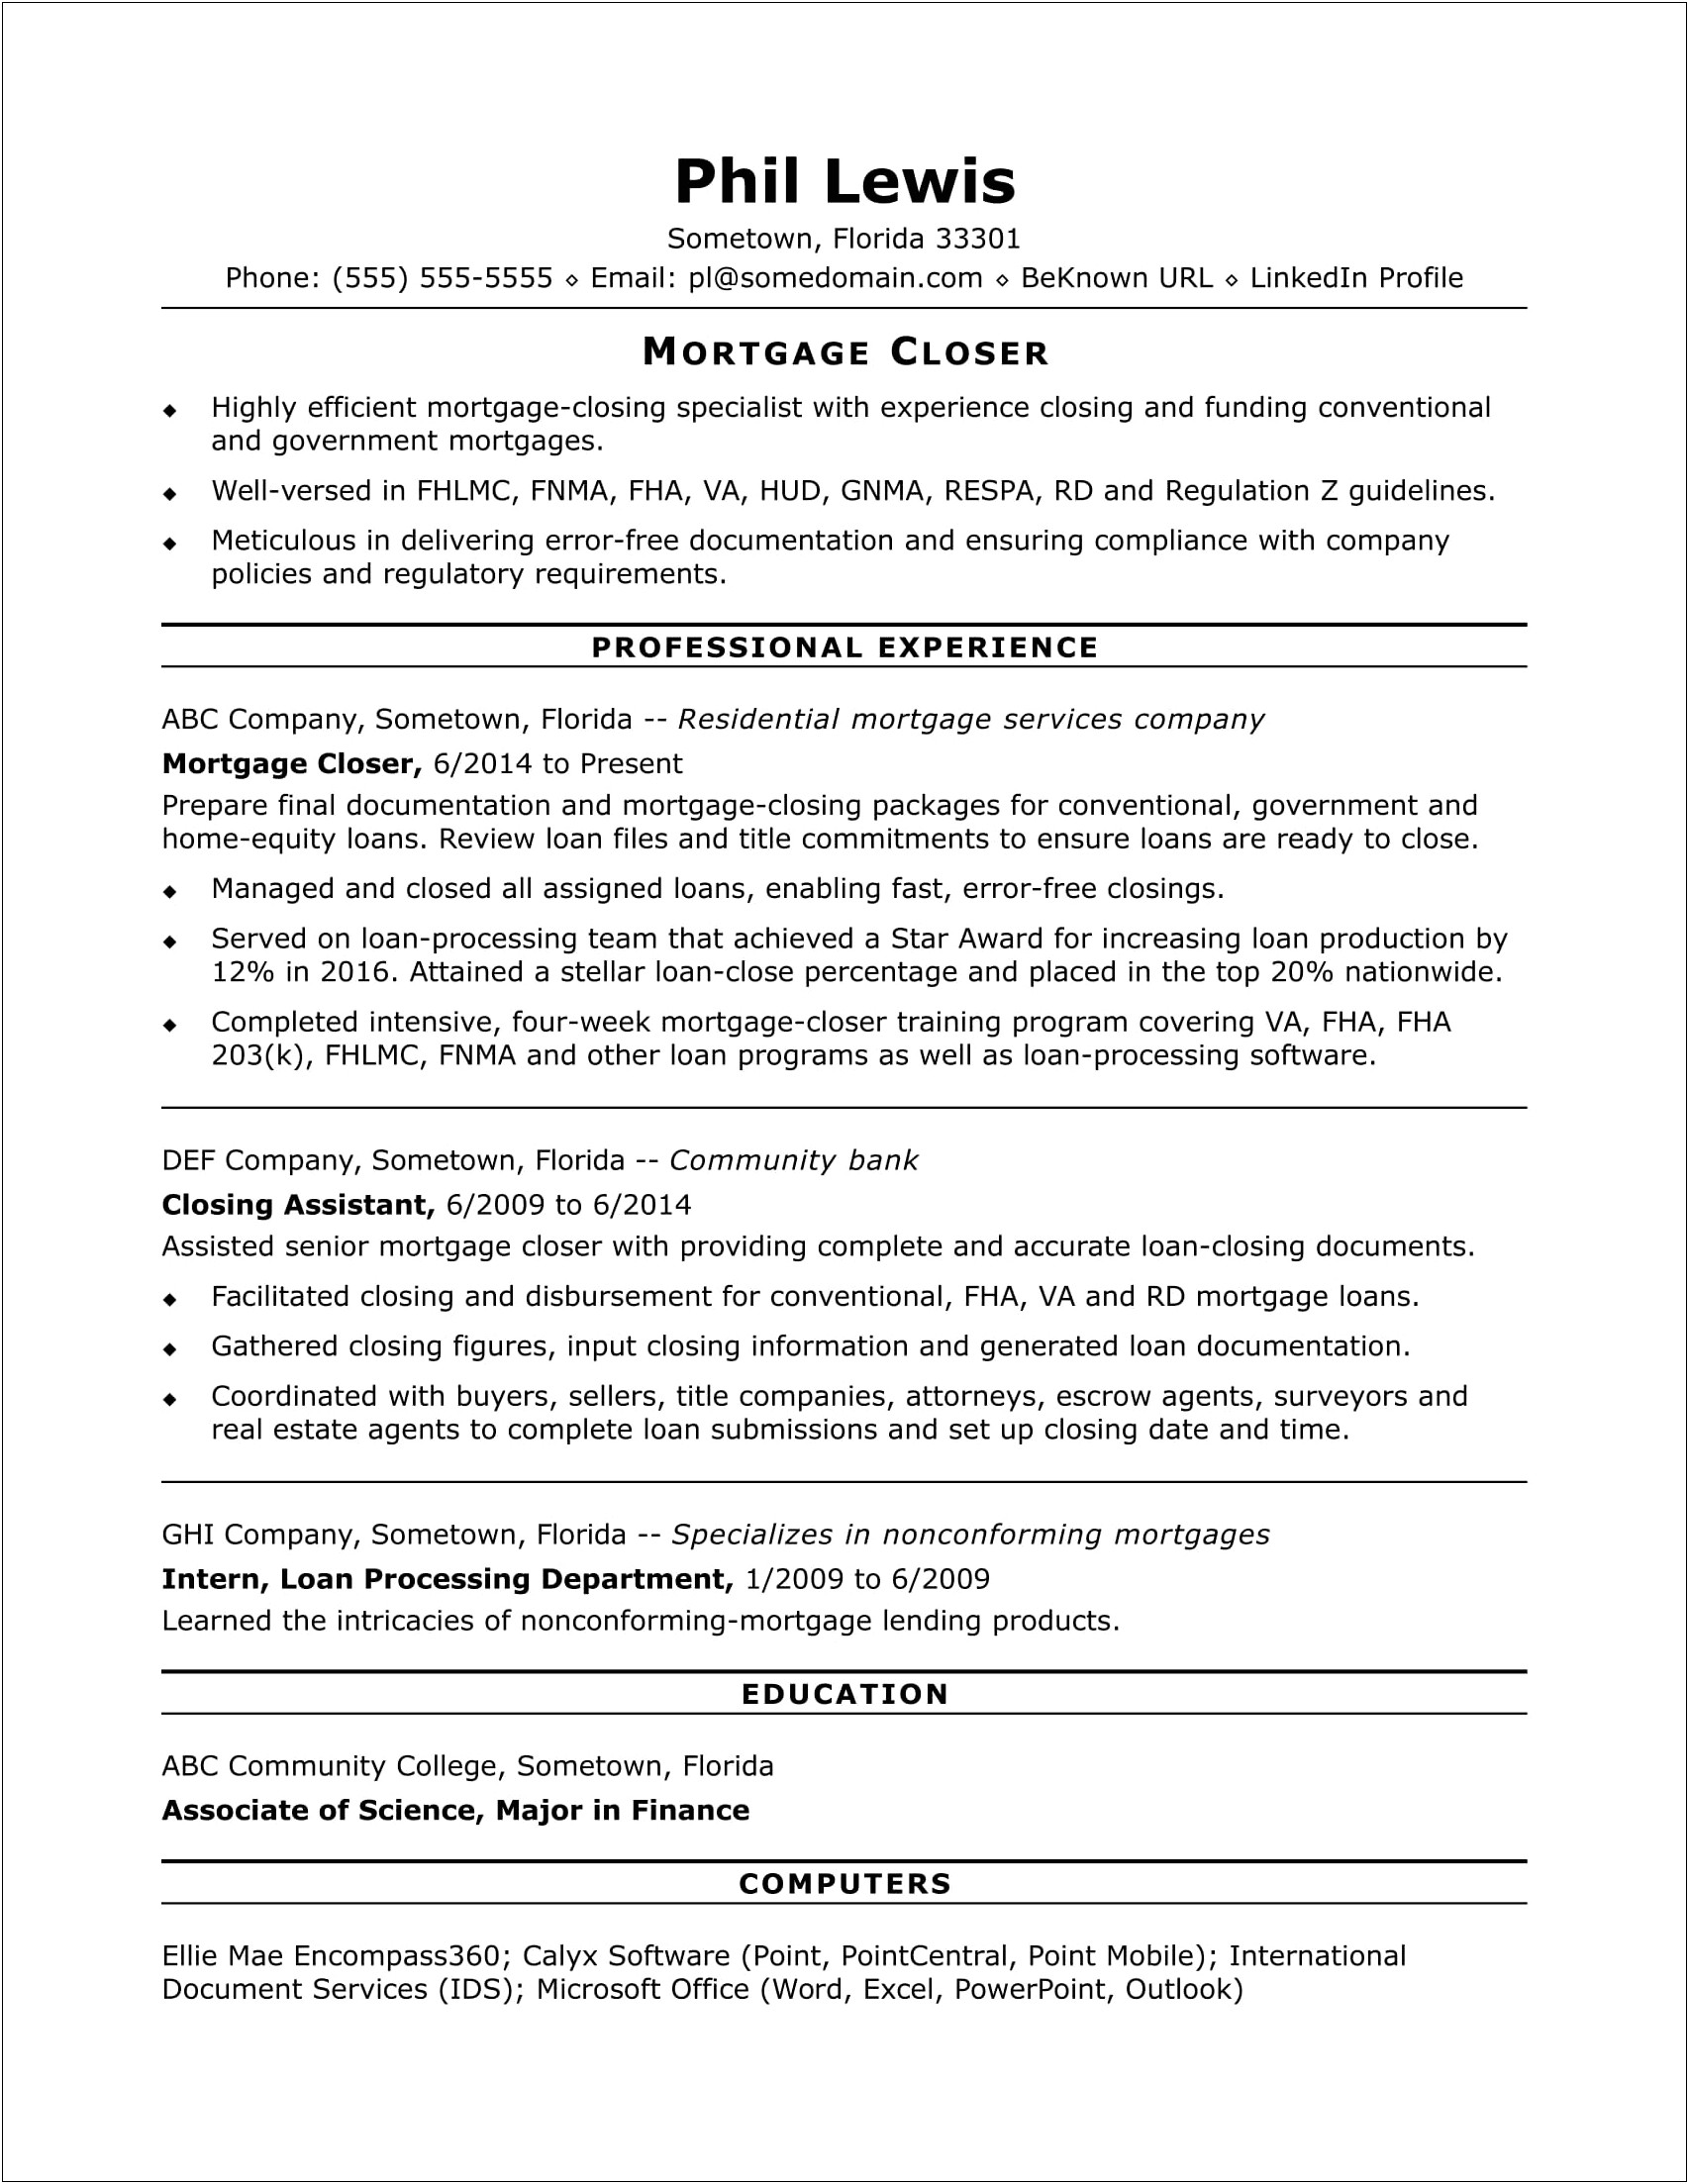 Sample Of A Mortgage Closer Resume